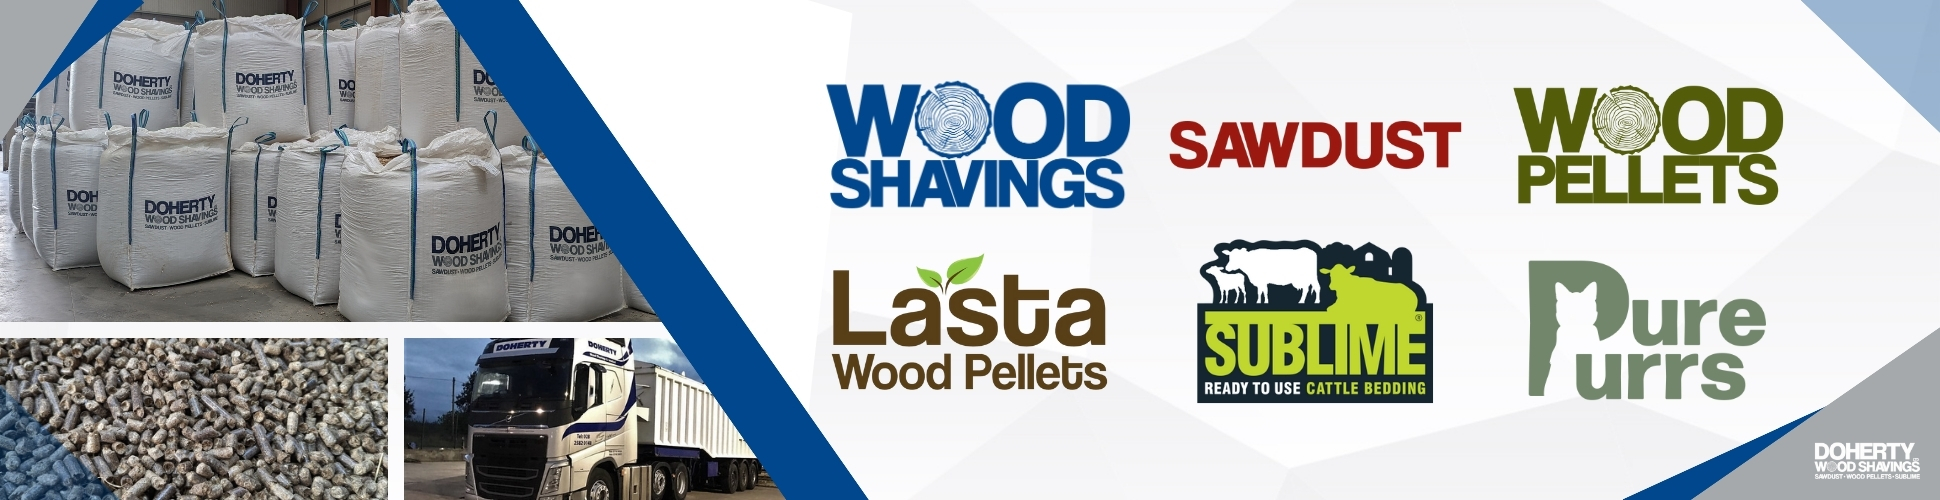 Doherty Wood Shavings brands - Quality Livestock and Poultry Bedding